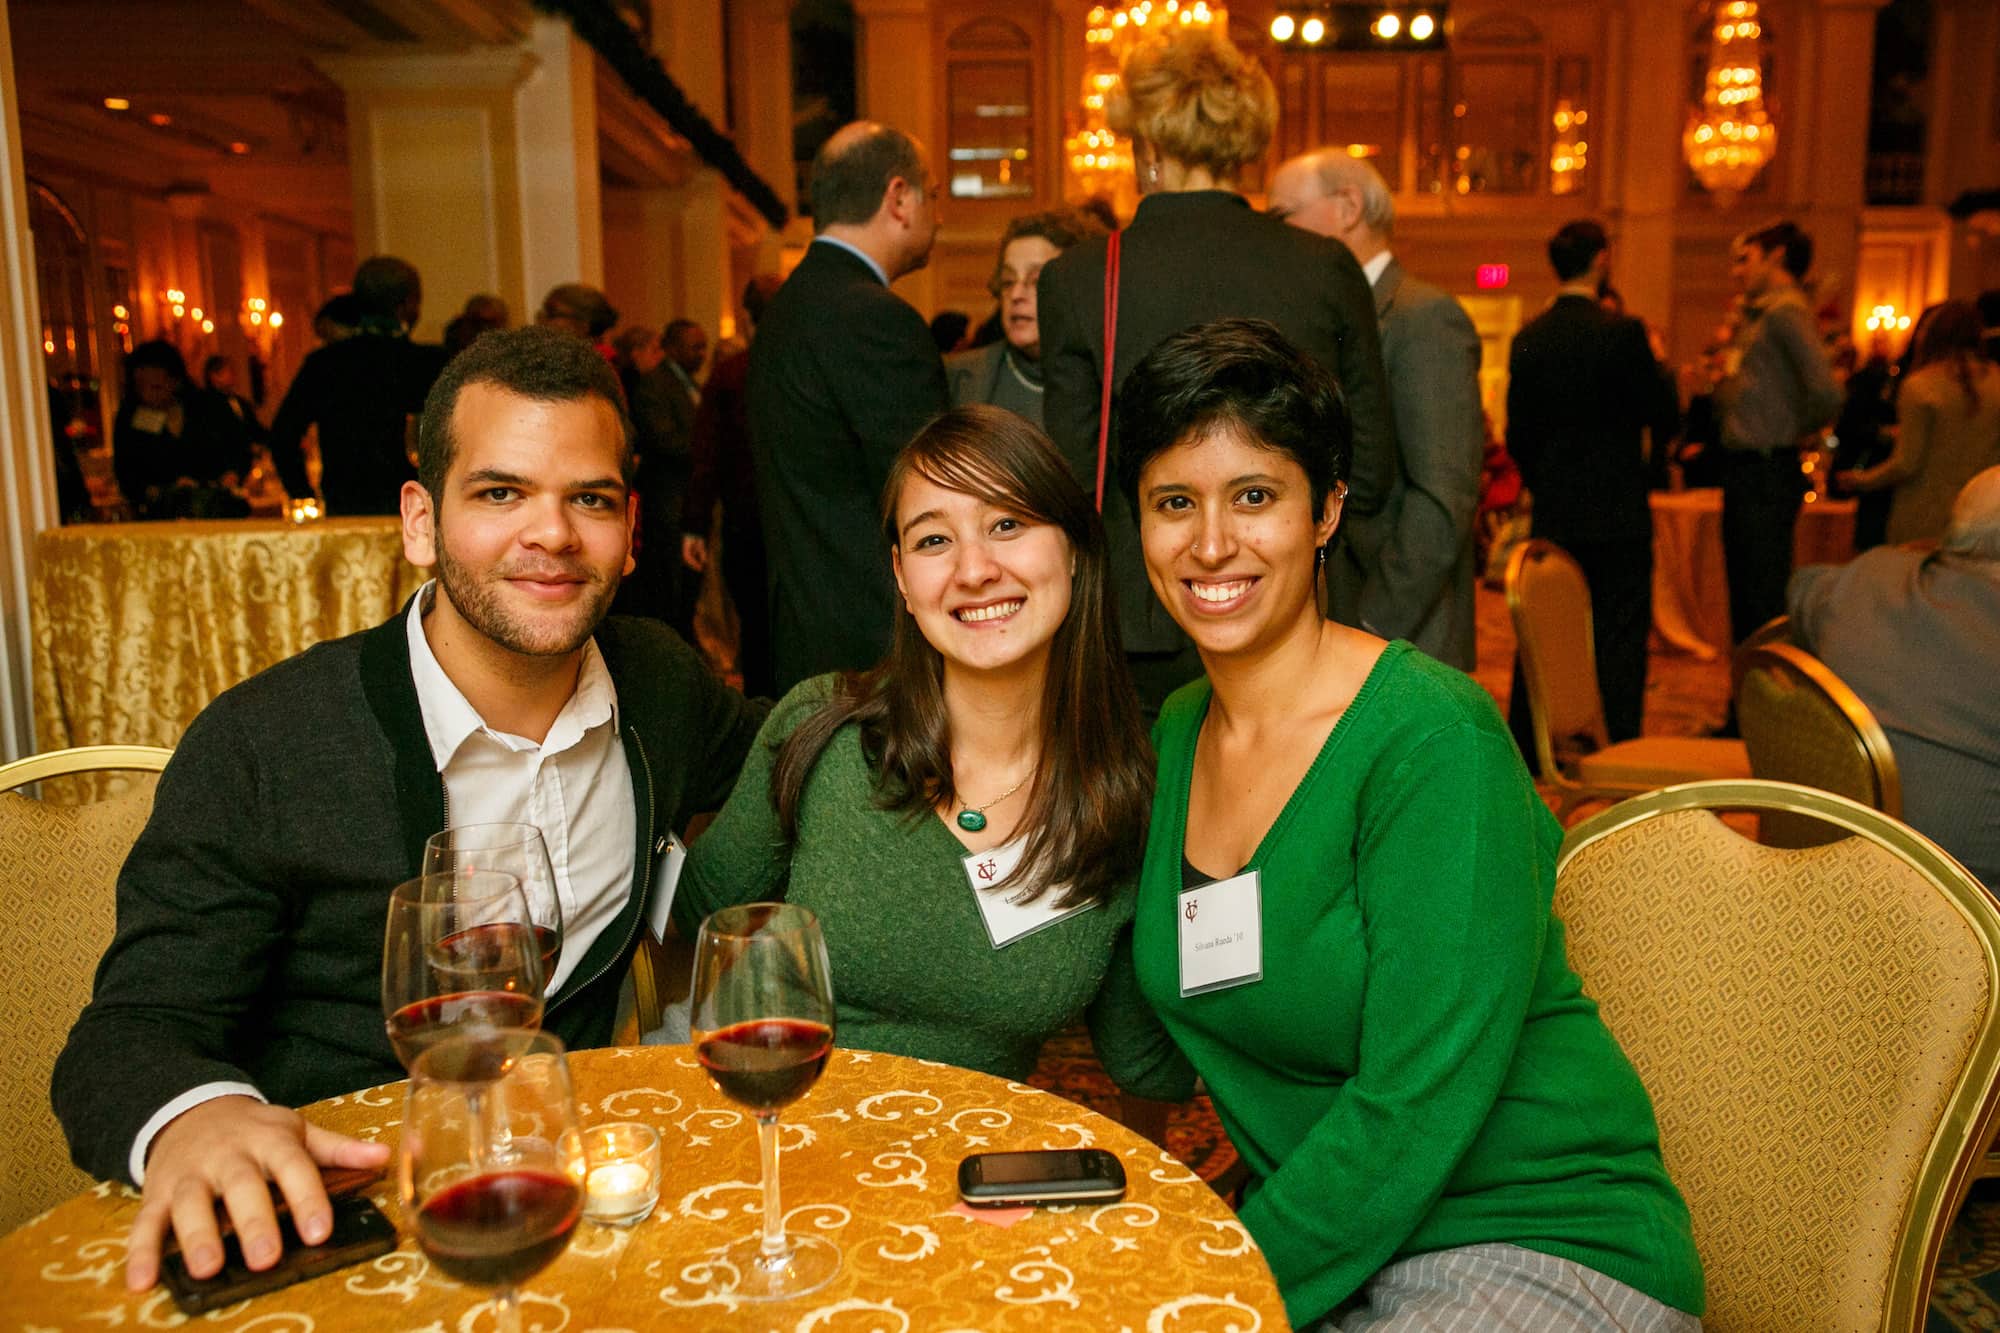 Three people seated at a table with wine glasses on it in a large interior space, smiling and leaning in for a photo.